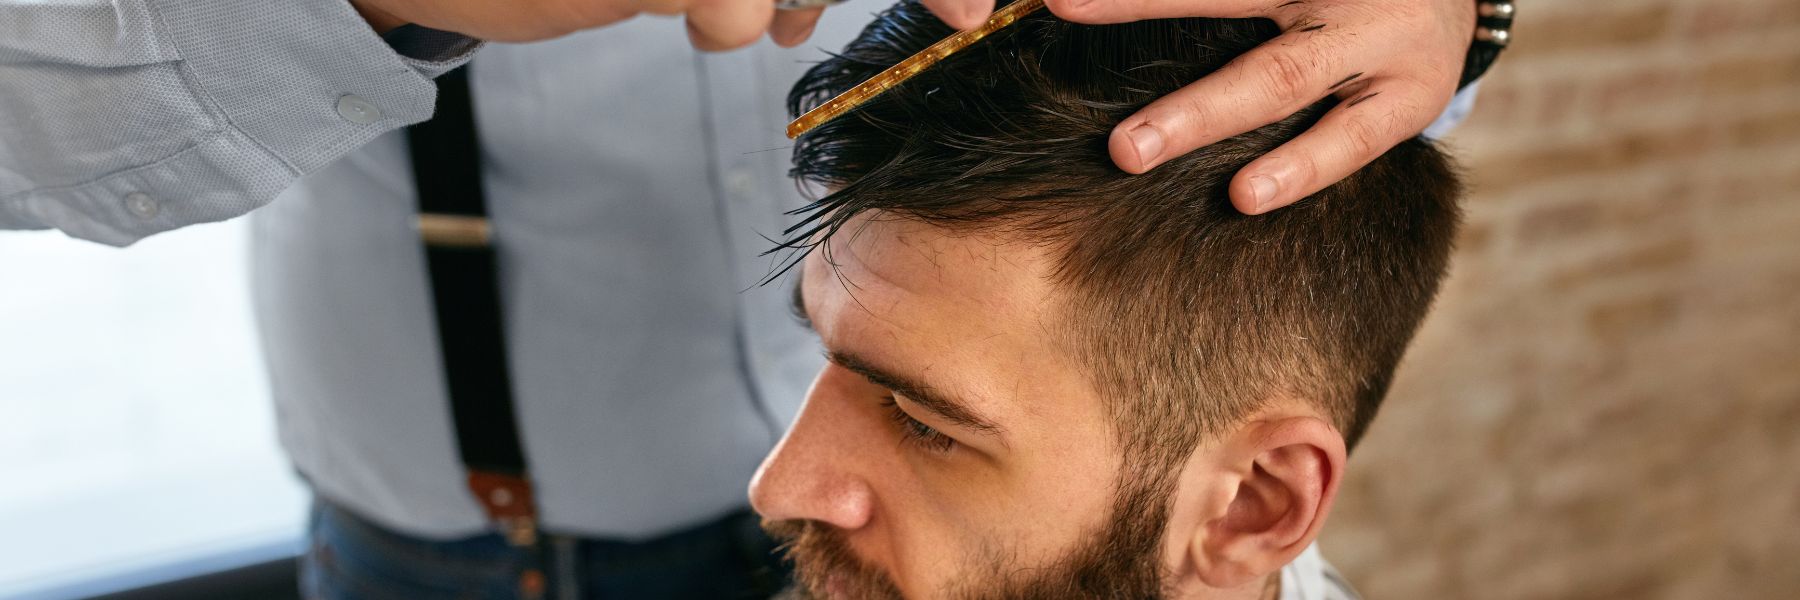 How to Choose the Best Styling Products for Men's Hair